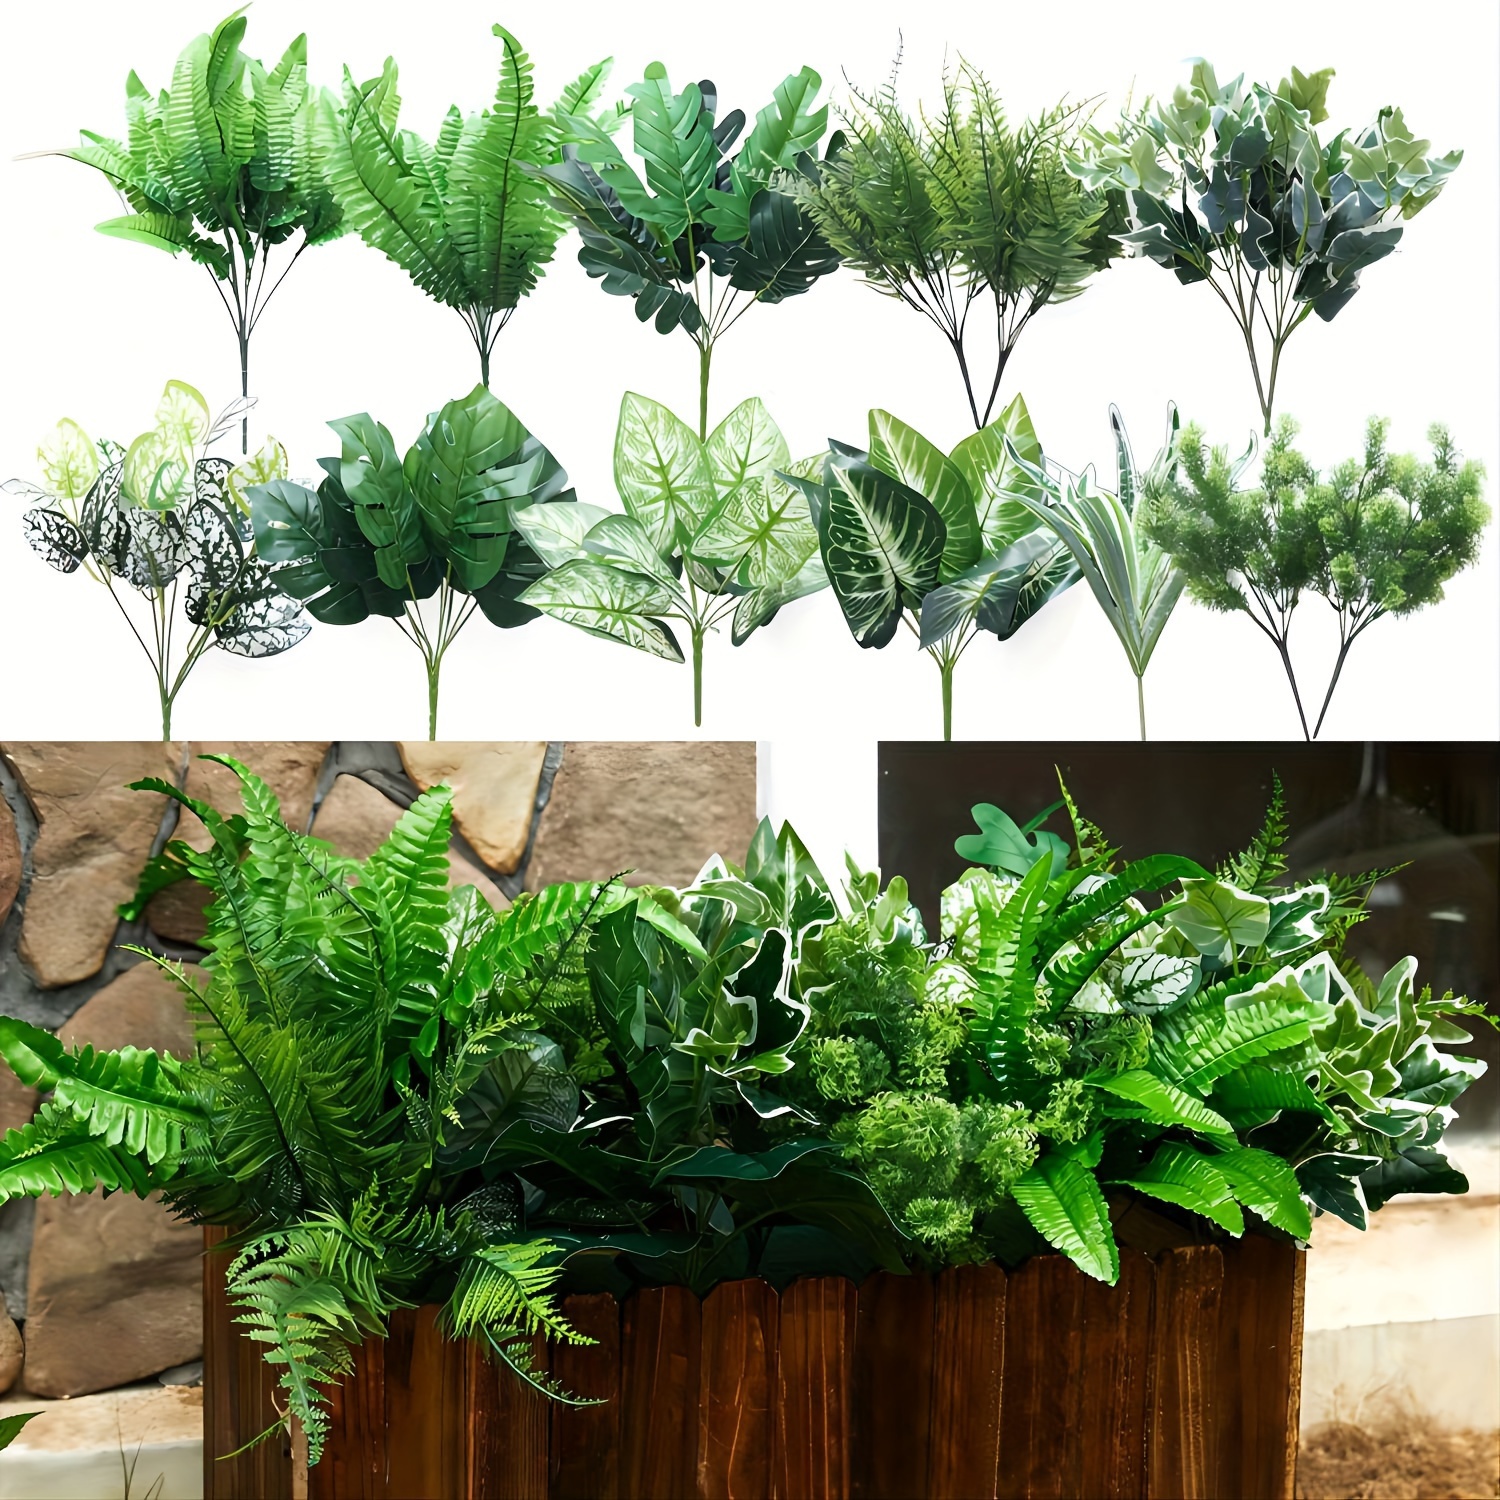 

14-pack Uv-resistant Artificial Greenery - Faux Shrubs & Flowers For Outdoor Garden, Patio, Front Porch Decor